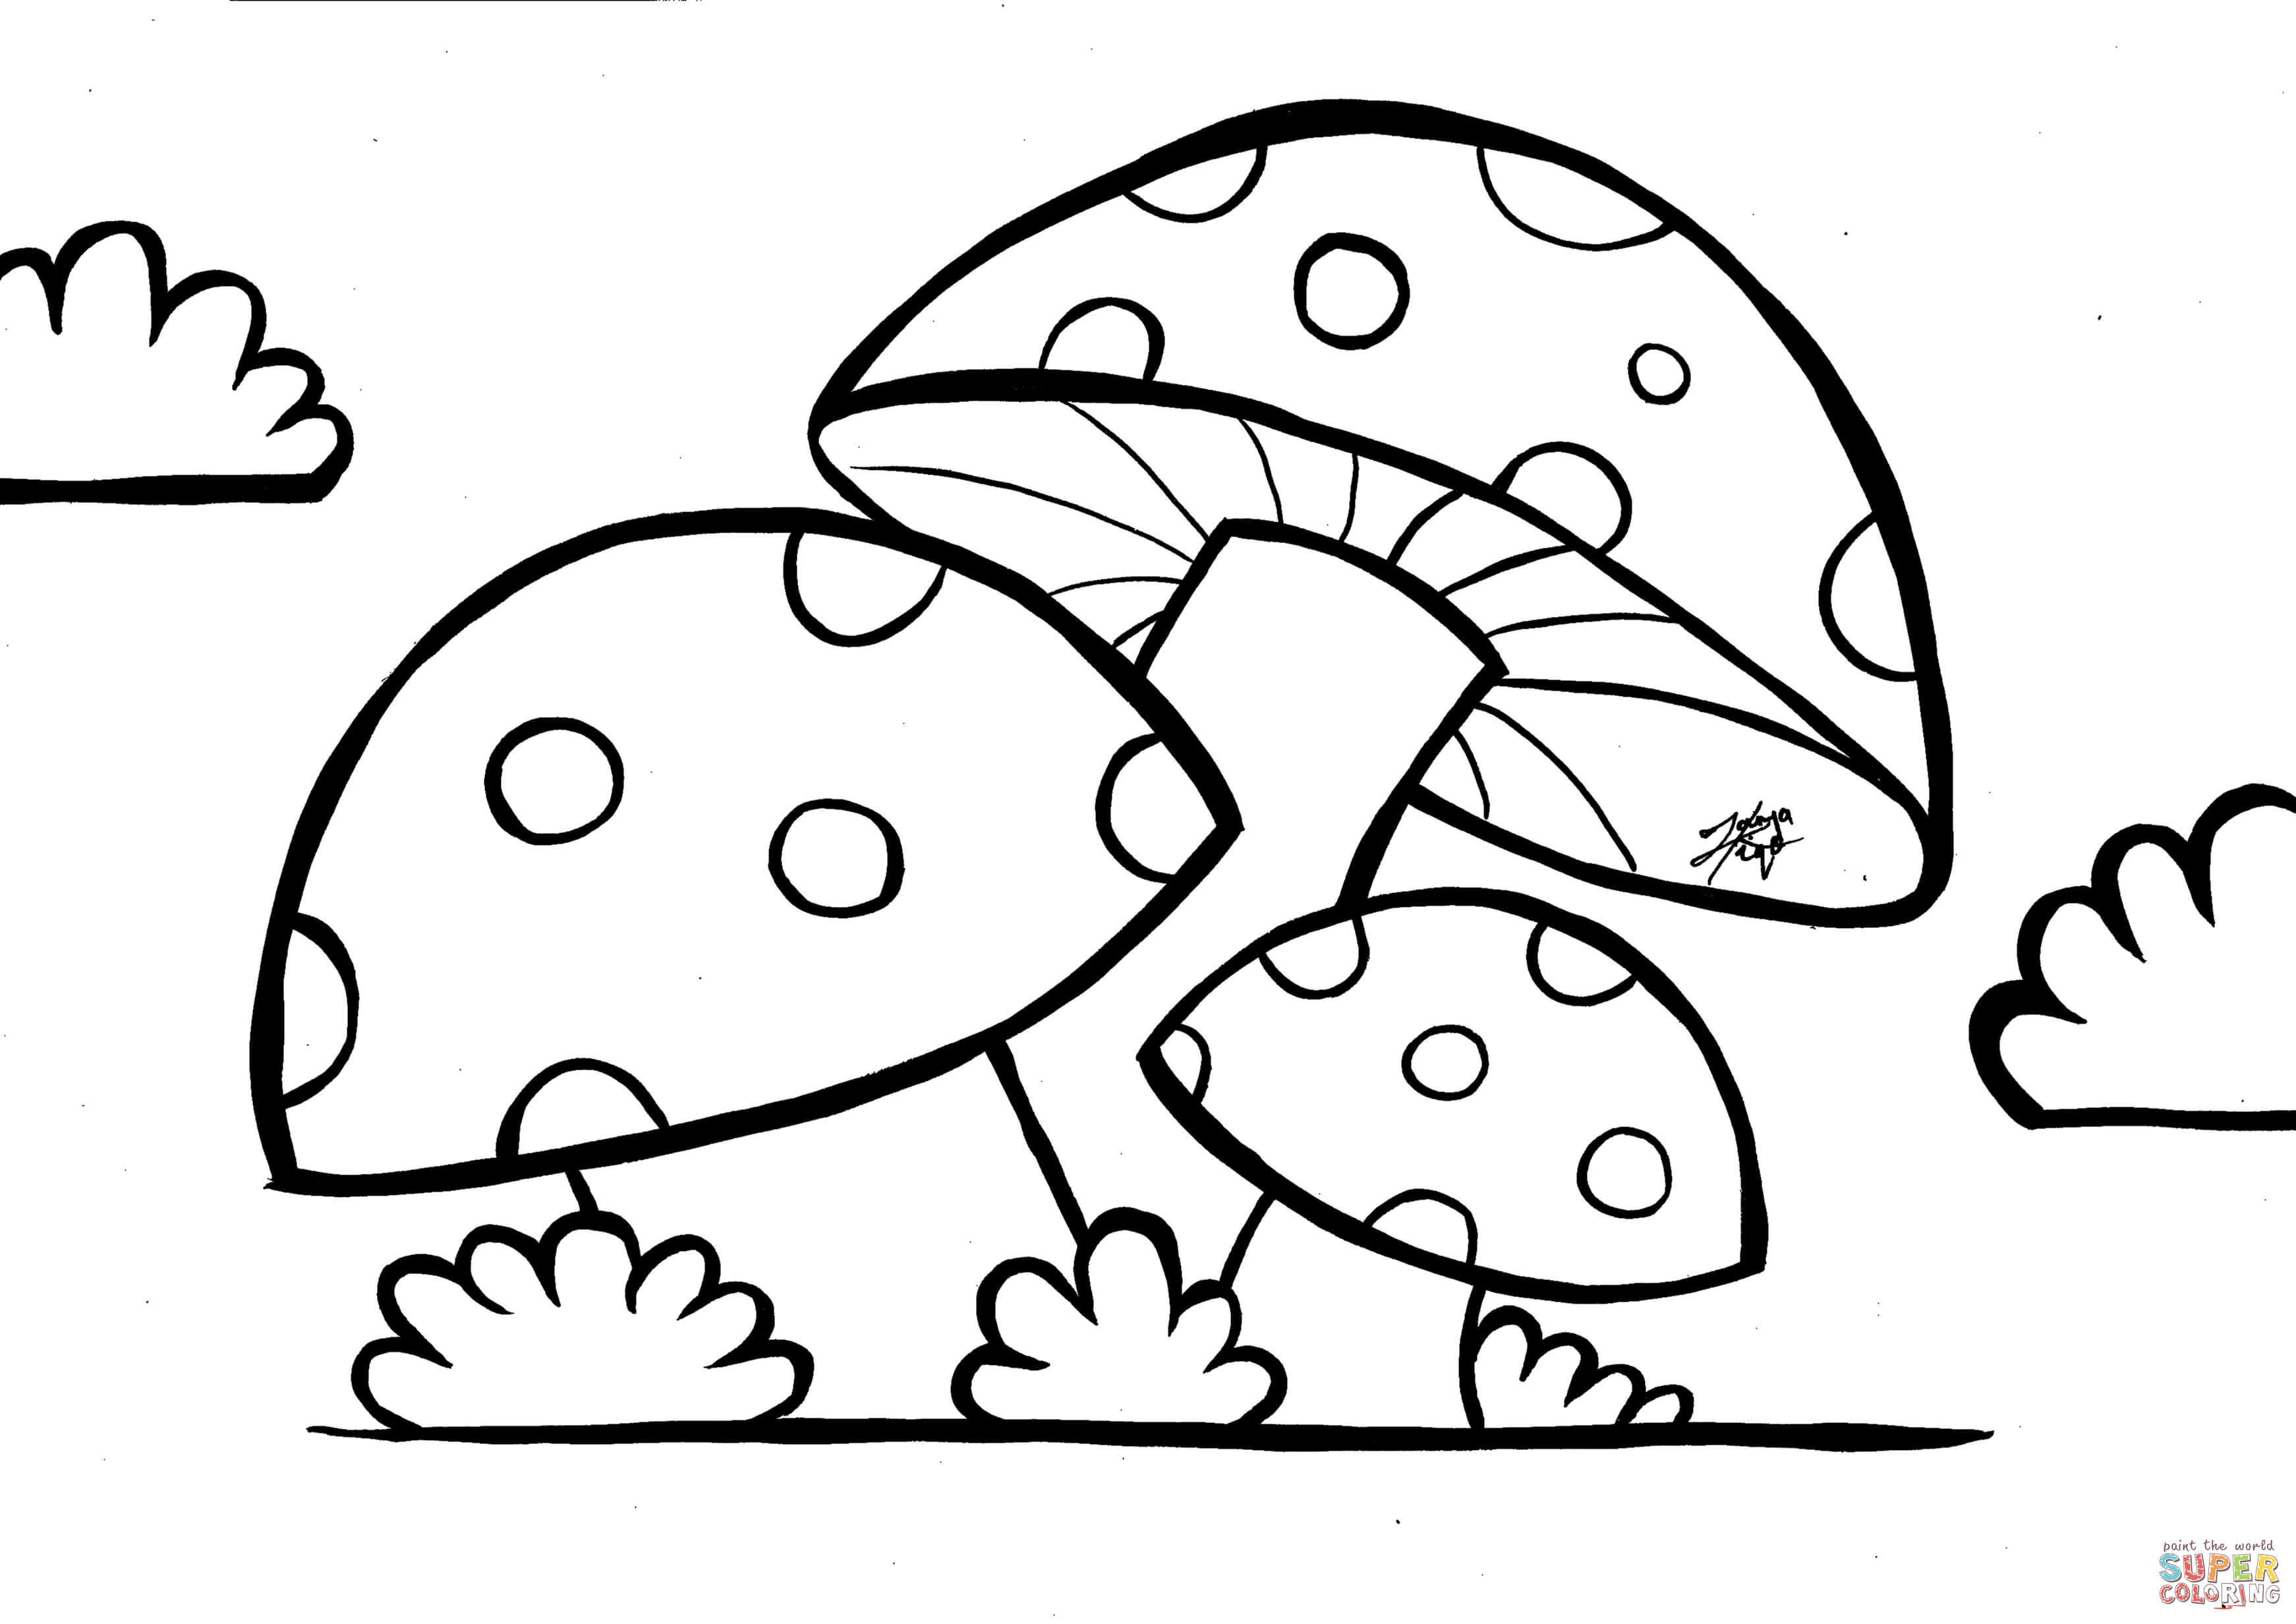 Mushroom coloring page | Free Printable Coloring Pages